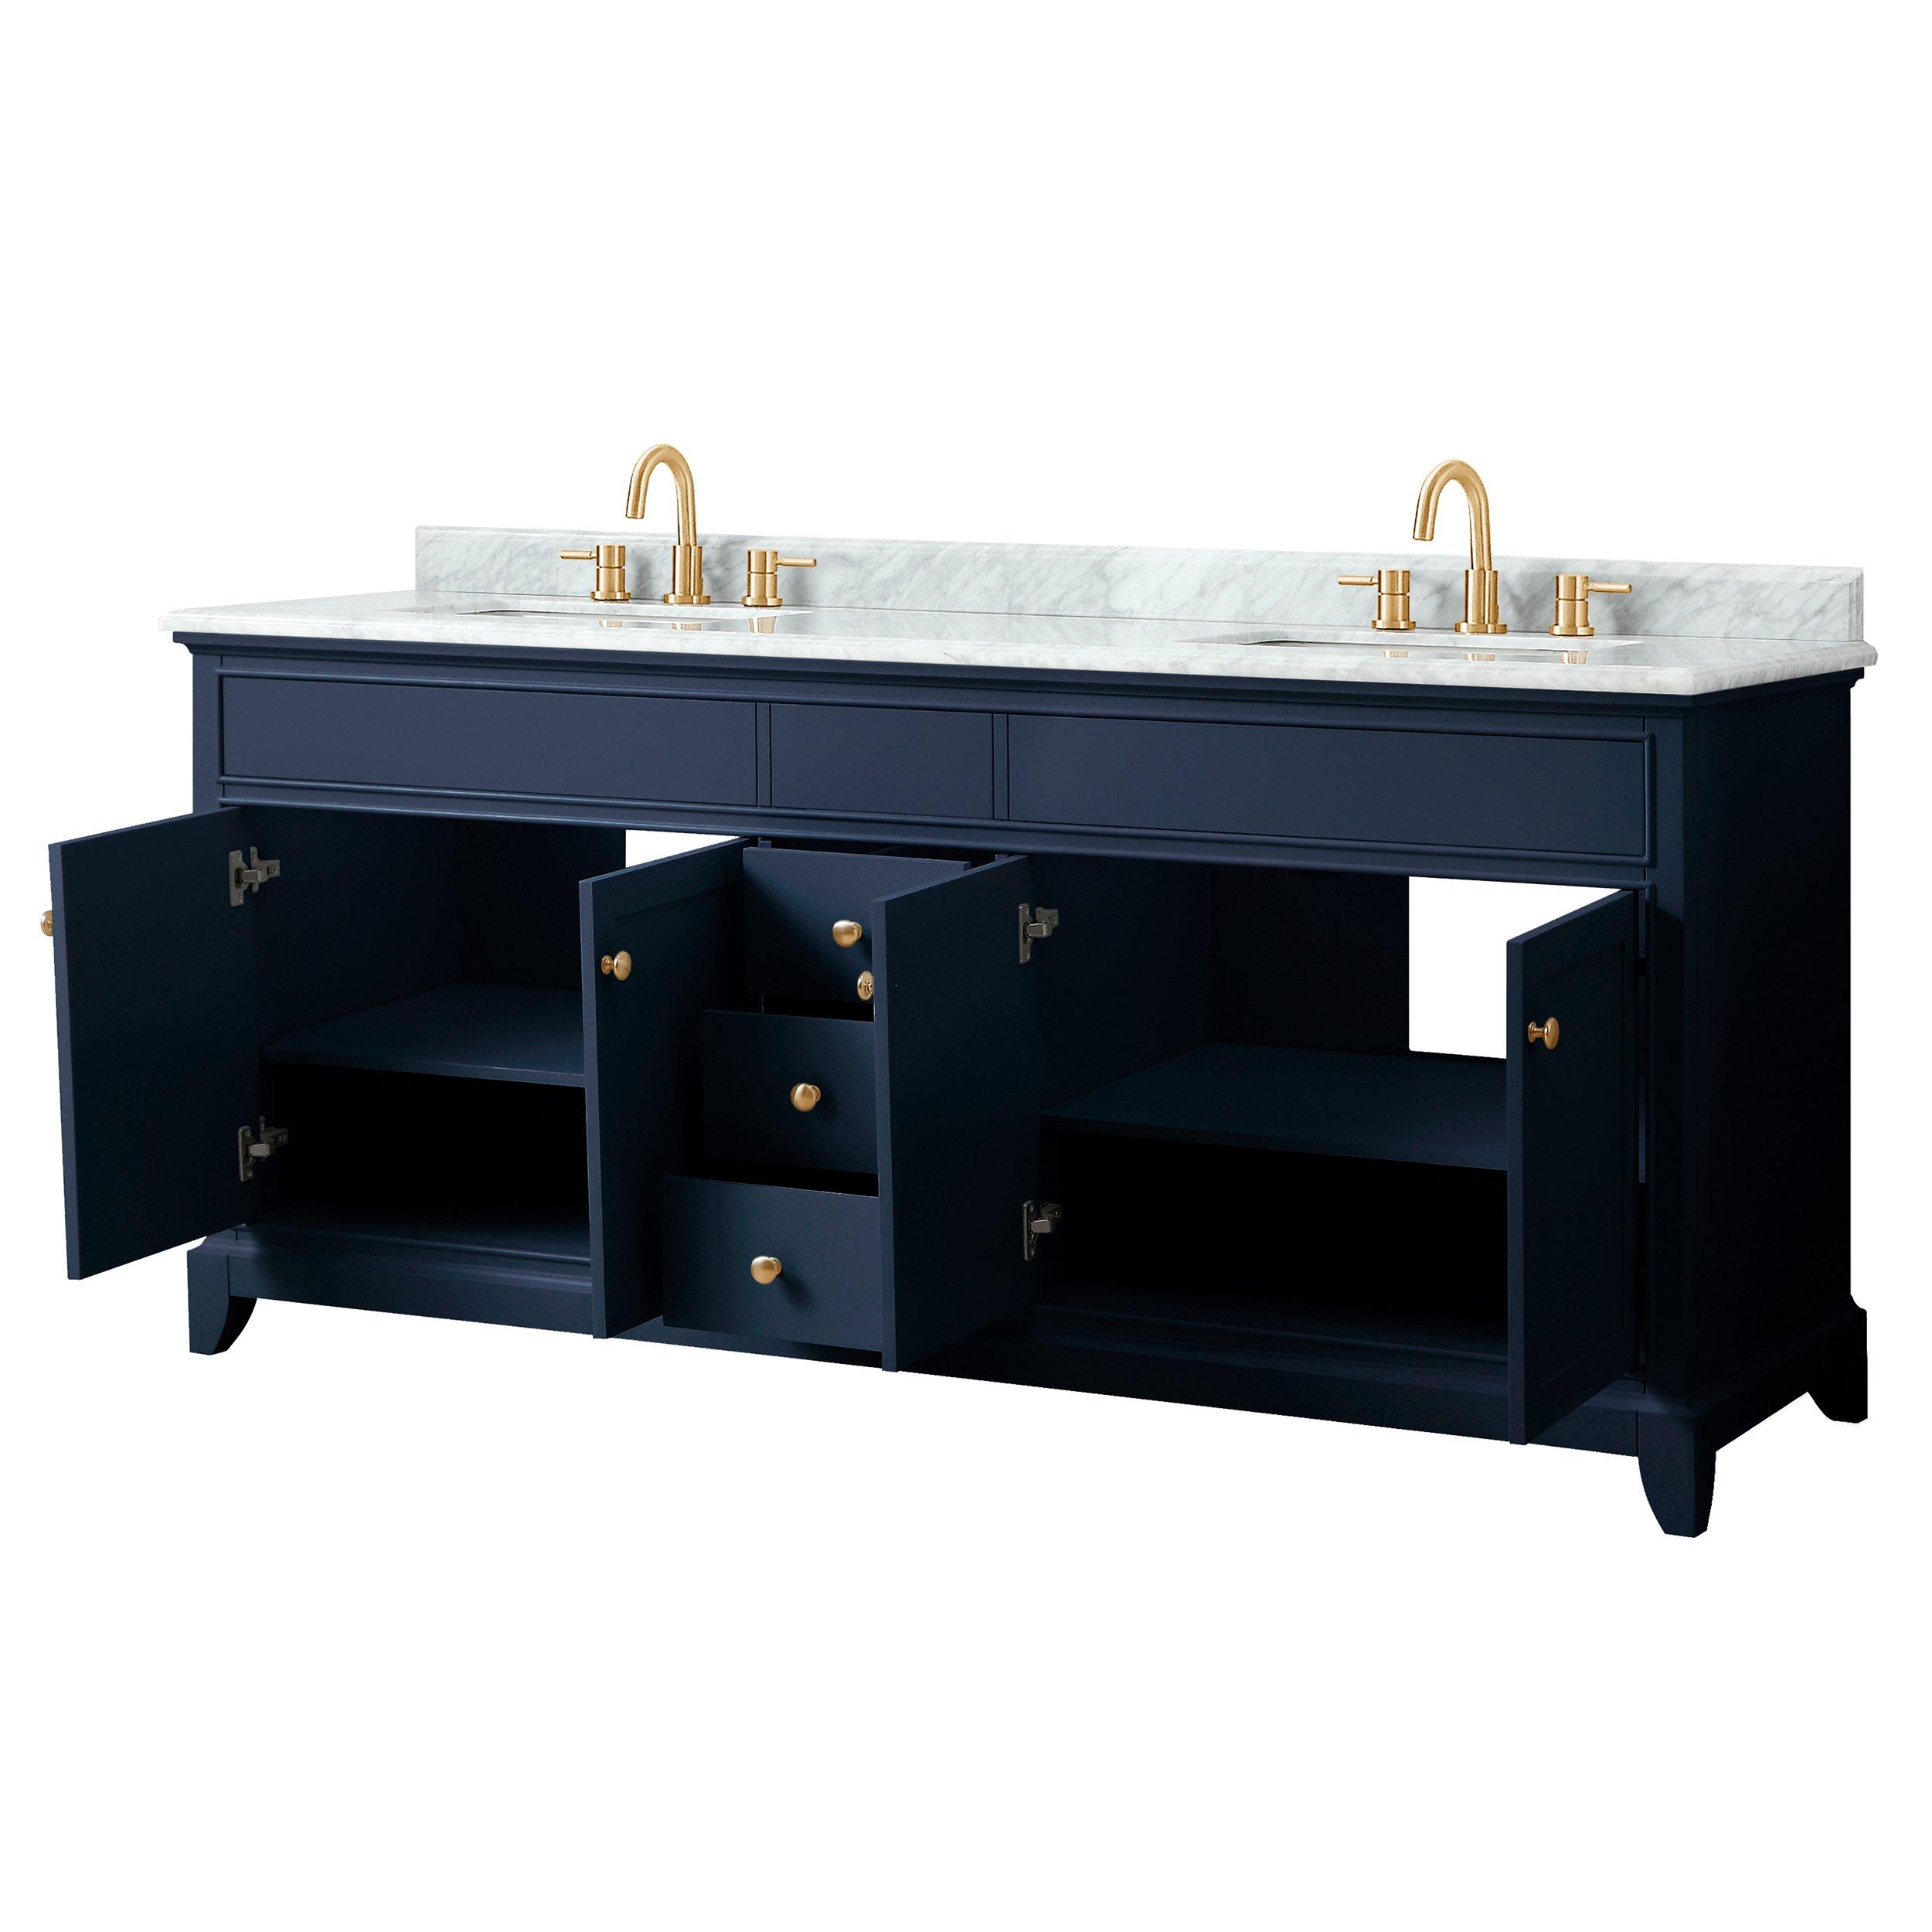 Auro 73 in. Navy Double Vanity with Carrara Marble Top